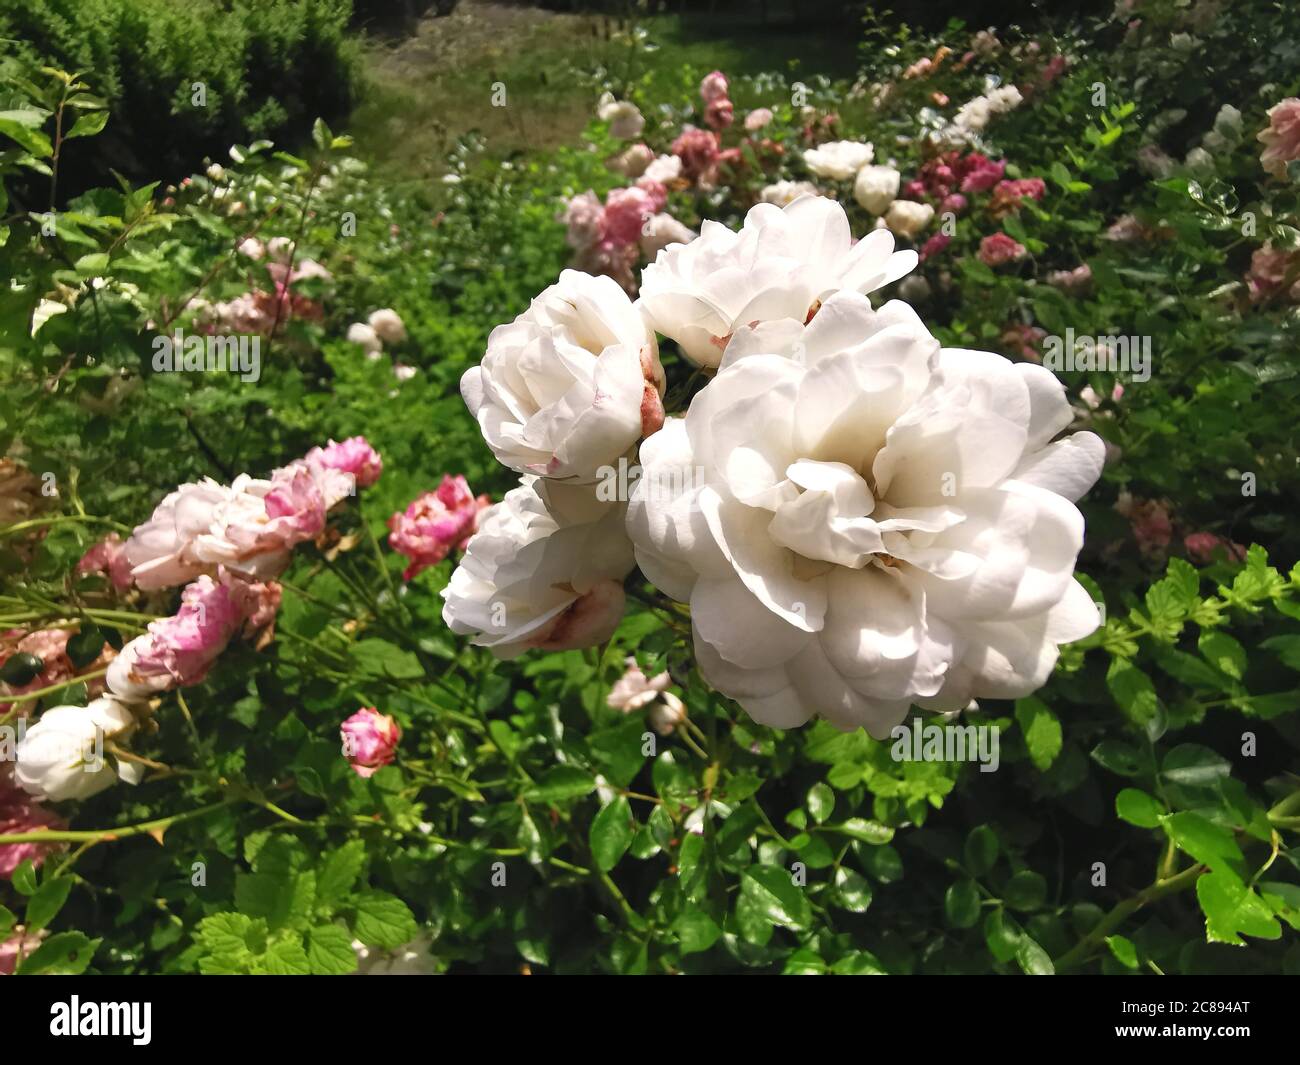 beautiful flowerbed with white and pink roses Stock Photo